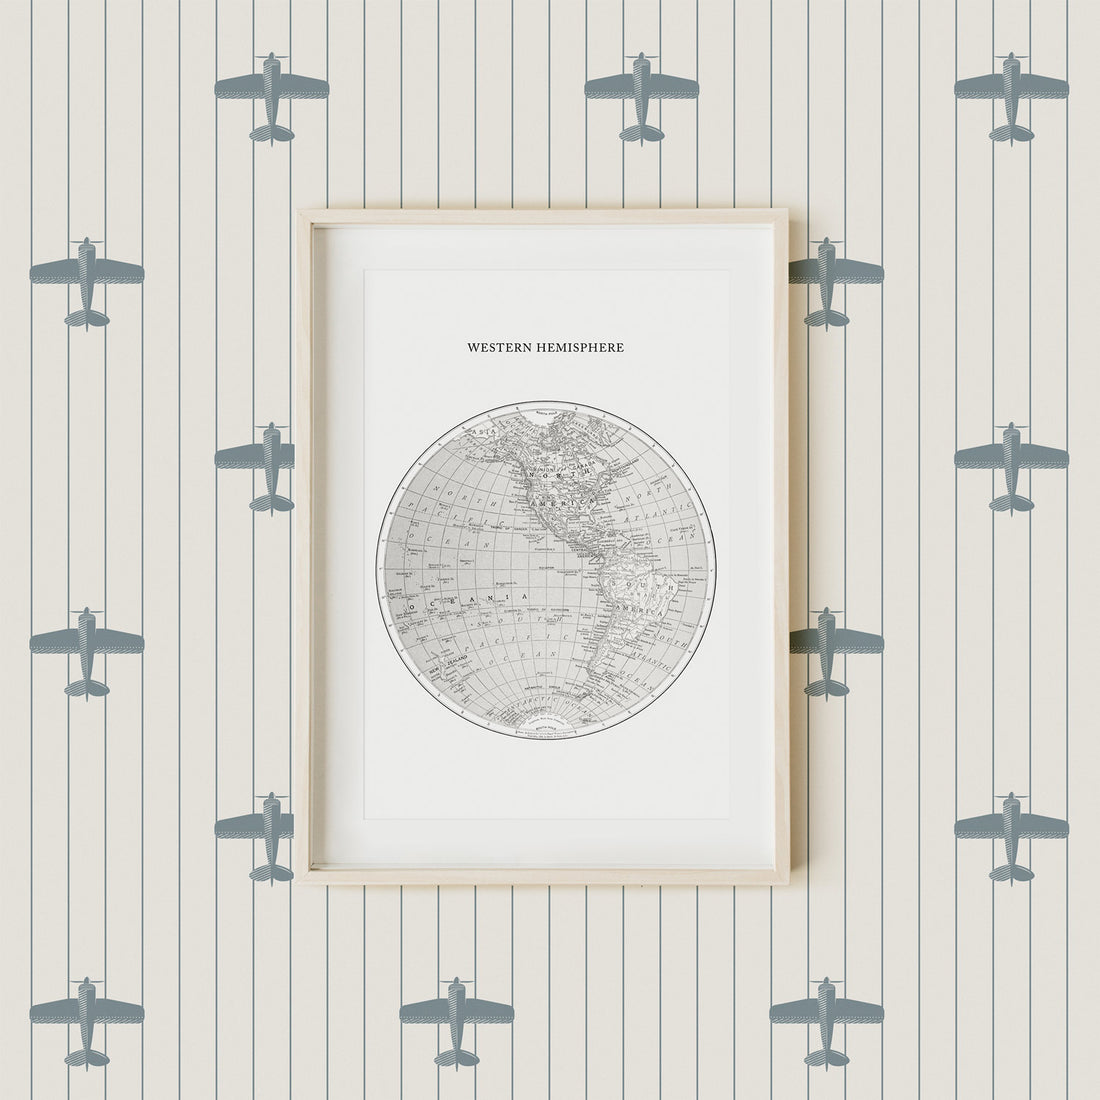 retro style boys room wallpaper with tiny planes in blue